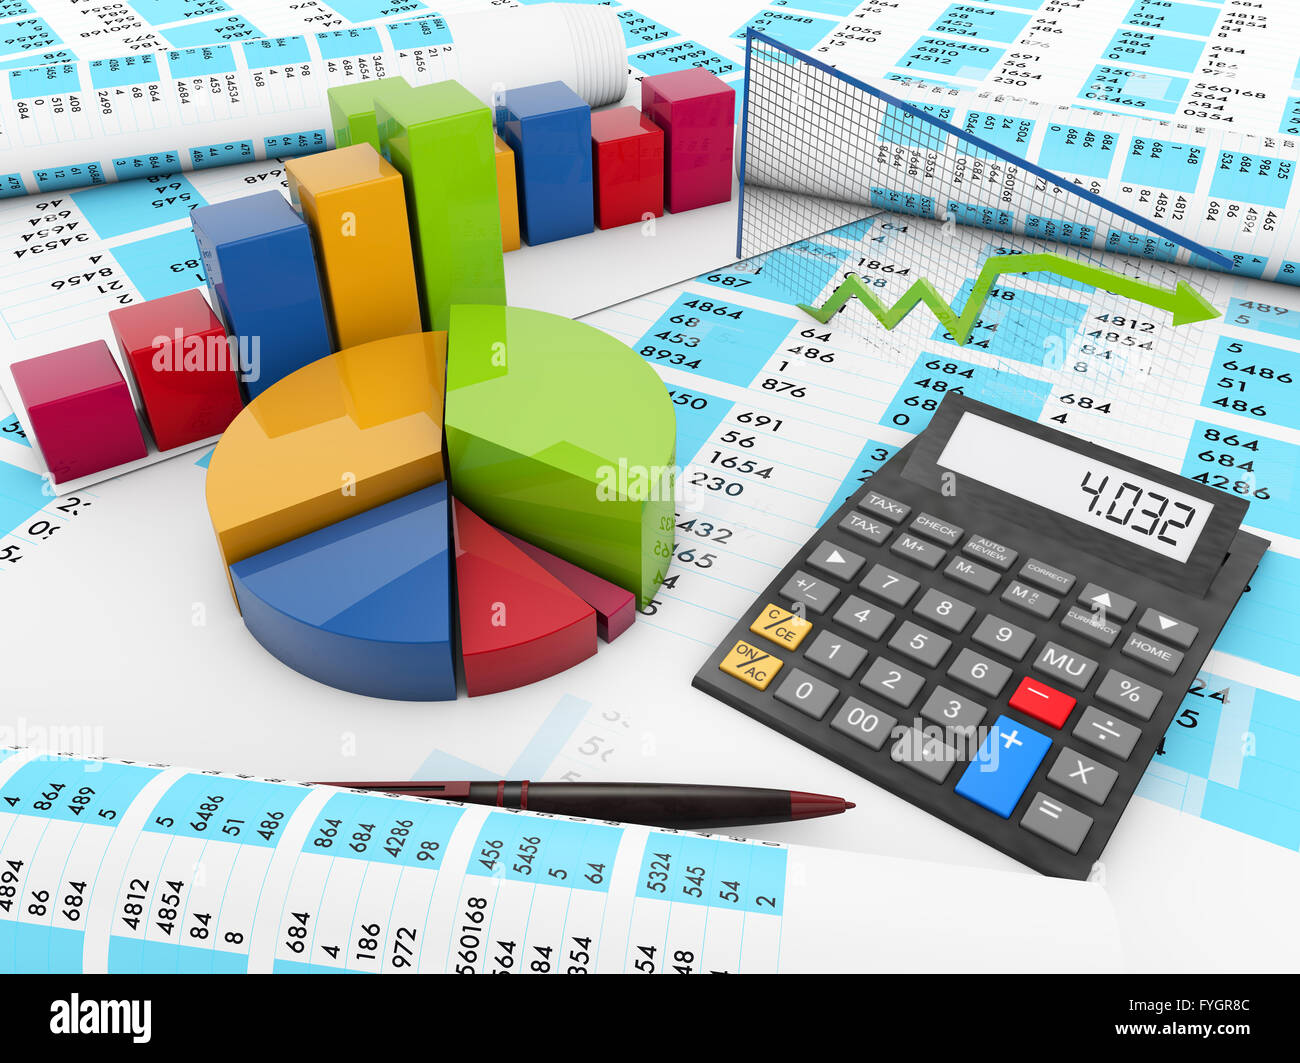 business concept: render of graphics and a calculator over balance accounts Stock Photo